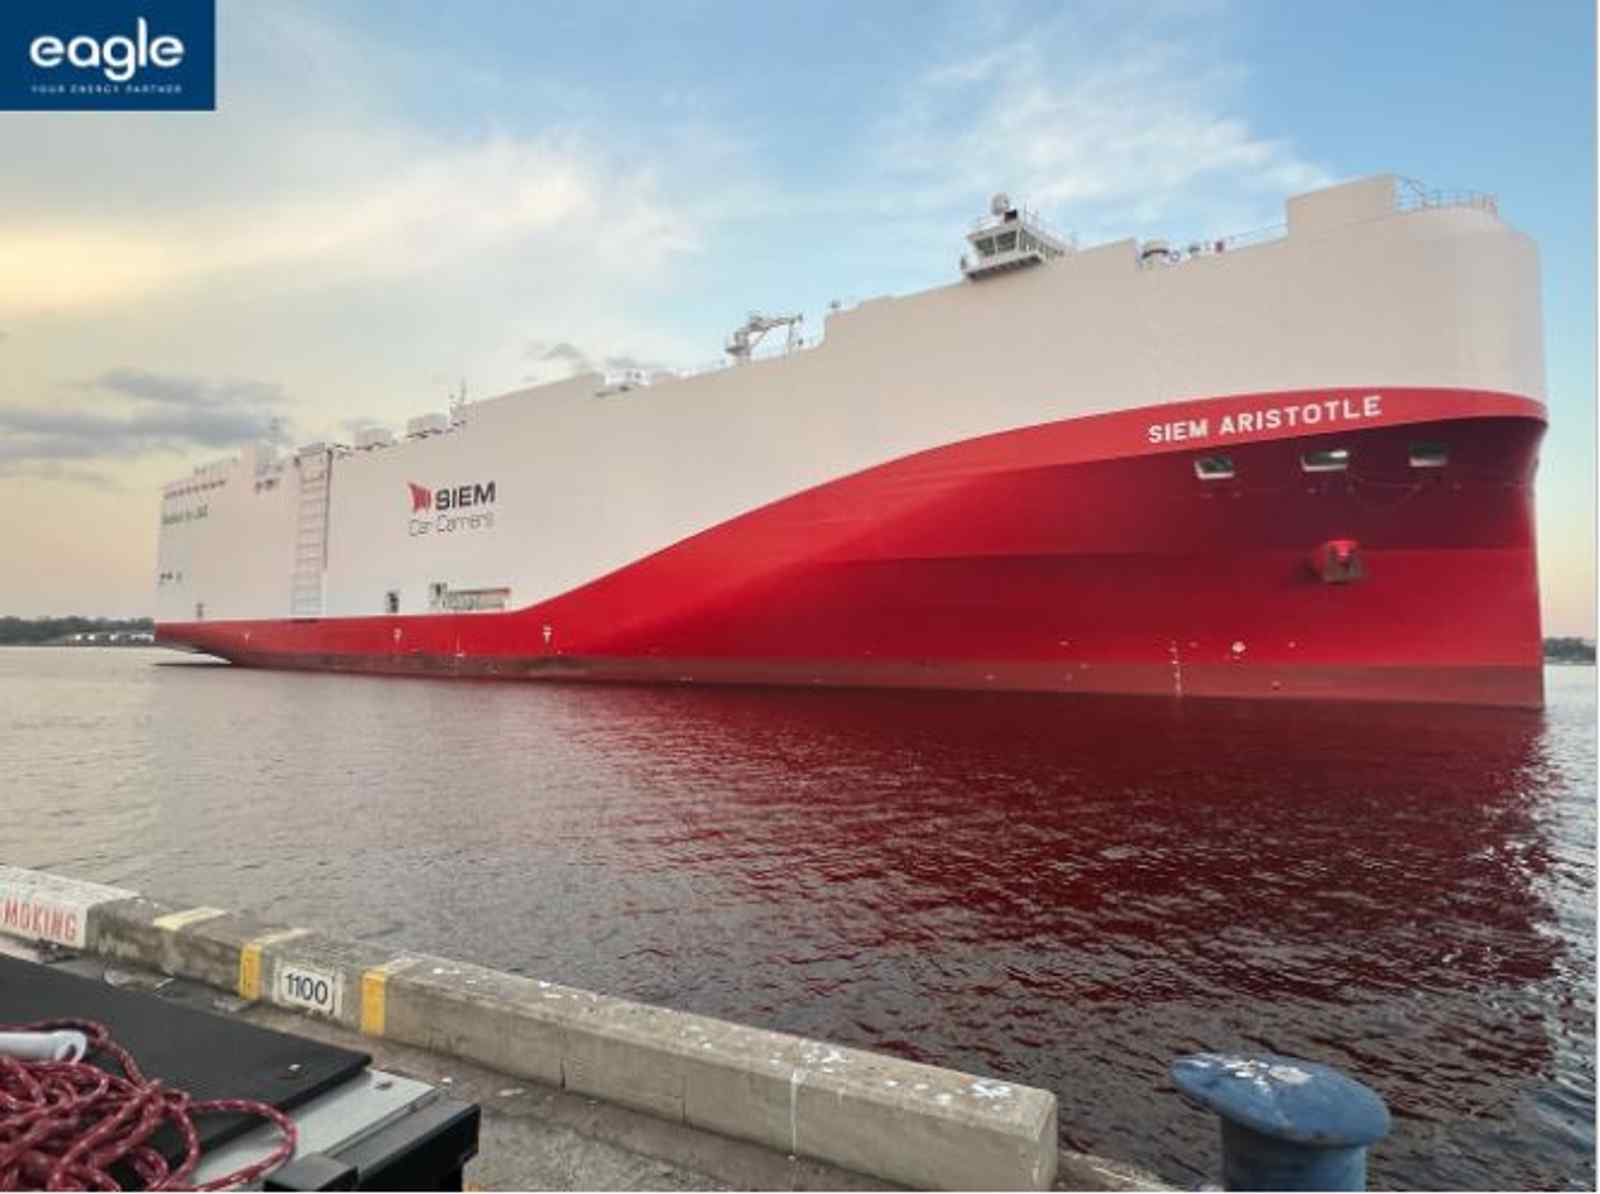 Eagle LNG sets another milestone with the first shore-to-ship bunkering for SIEM car carrier